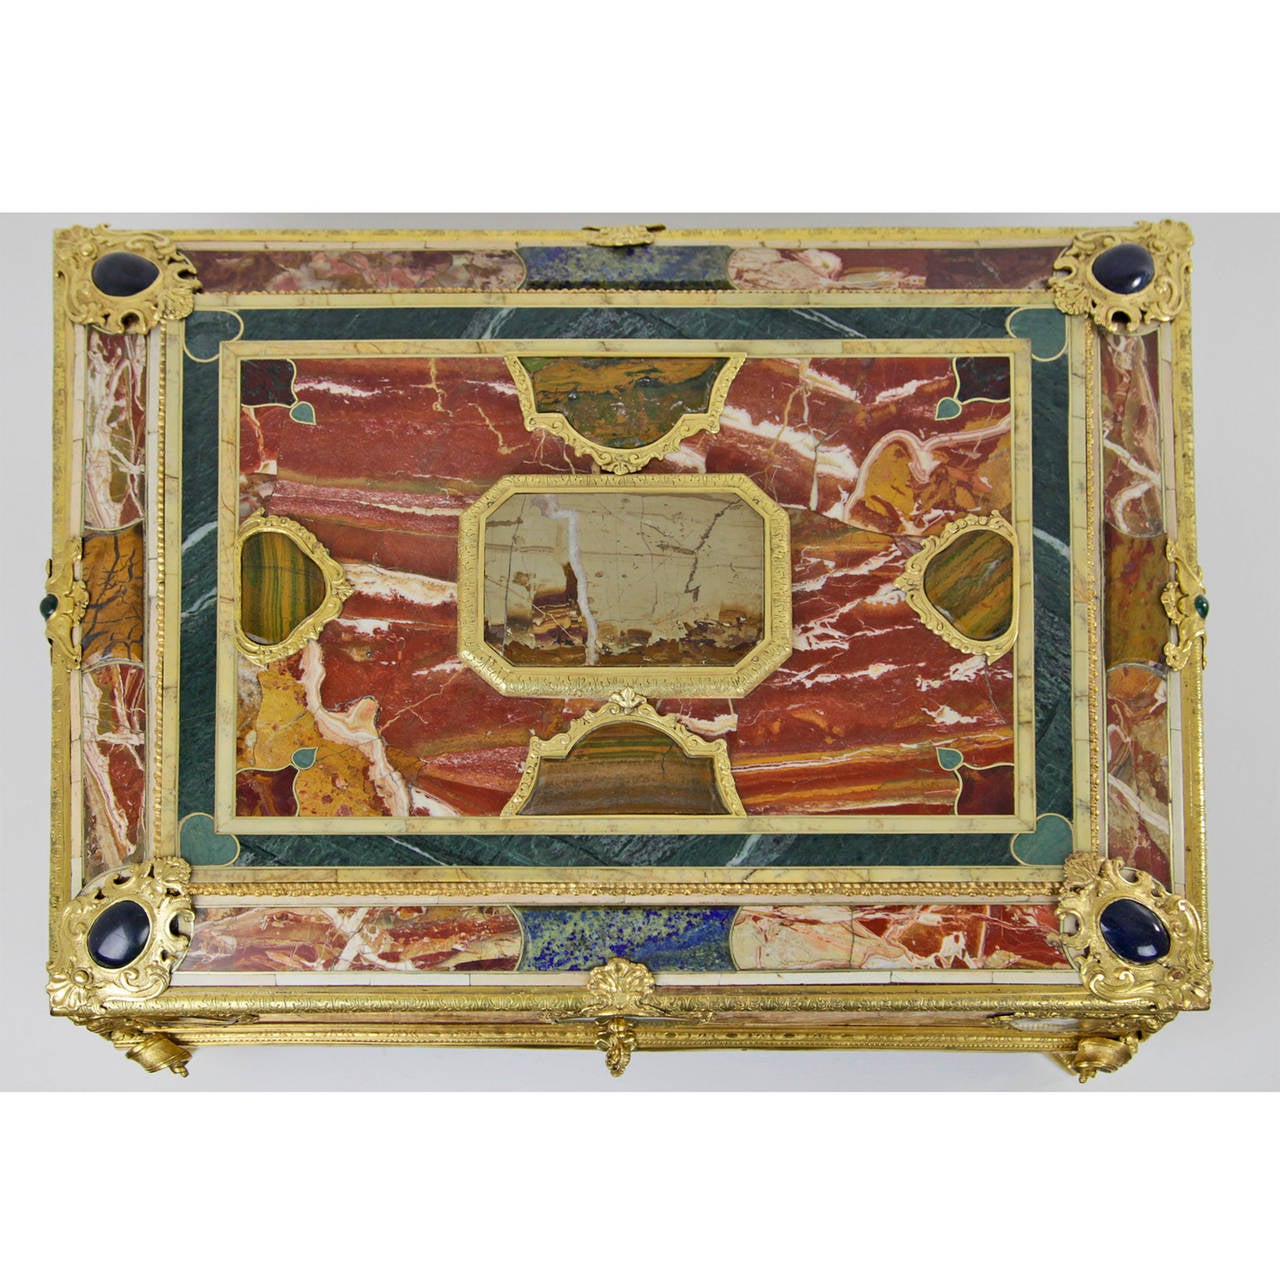 Stunning Dokument Casket with marble and semi-precious stones occupied and fire gilded bronze ornaments, mid-19th Century.
Restored under use old parts.
Corpus spruce with various marble and semi-precious stone (jasper, lazurite, malachite)